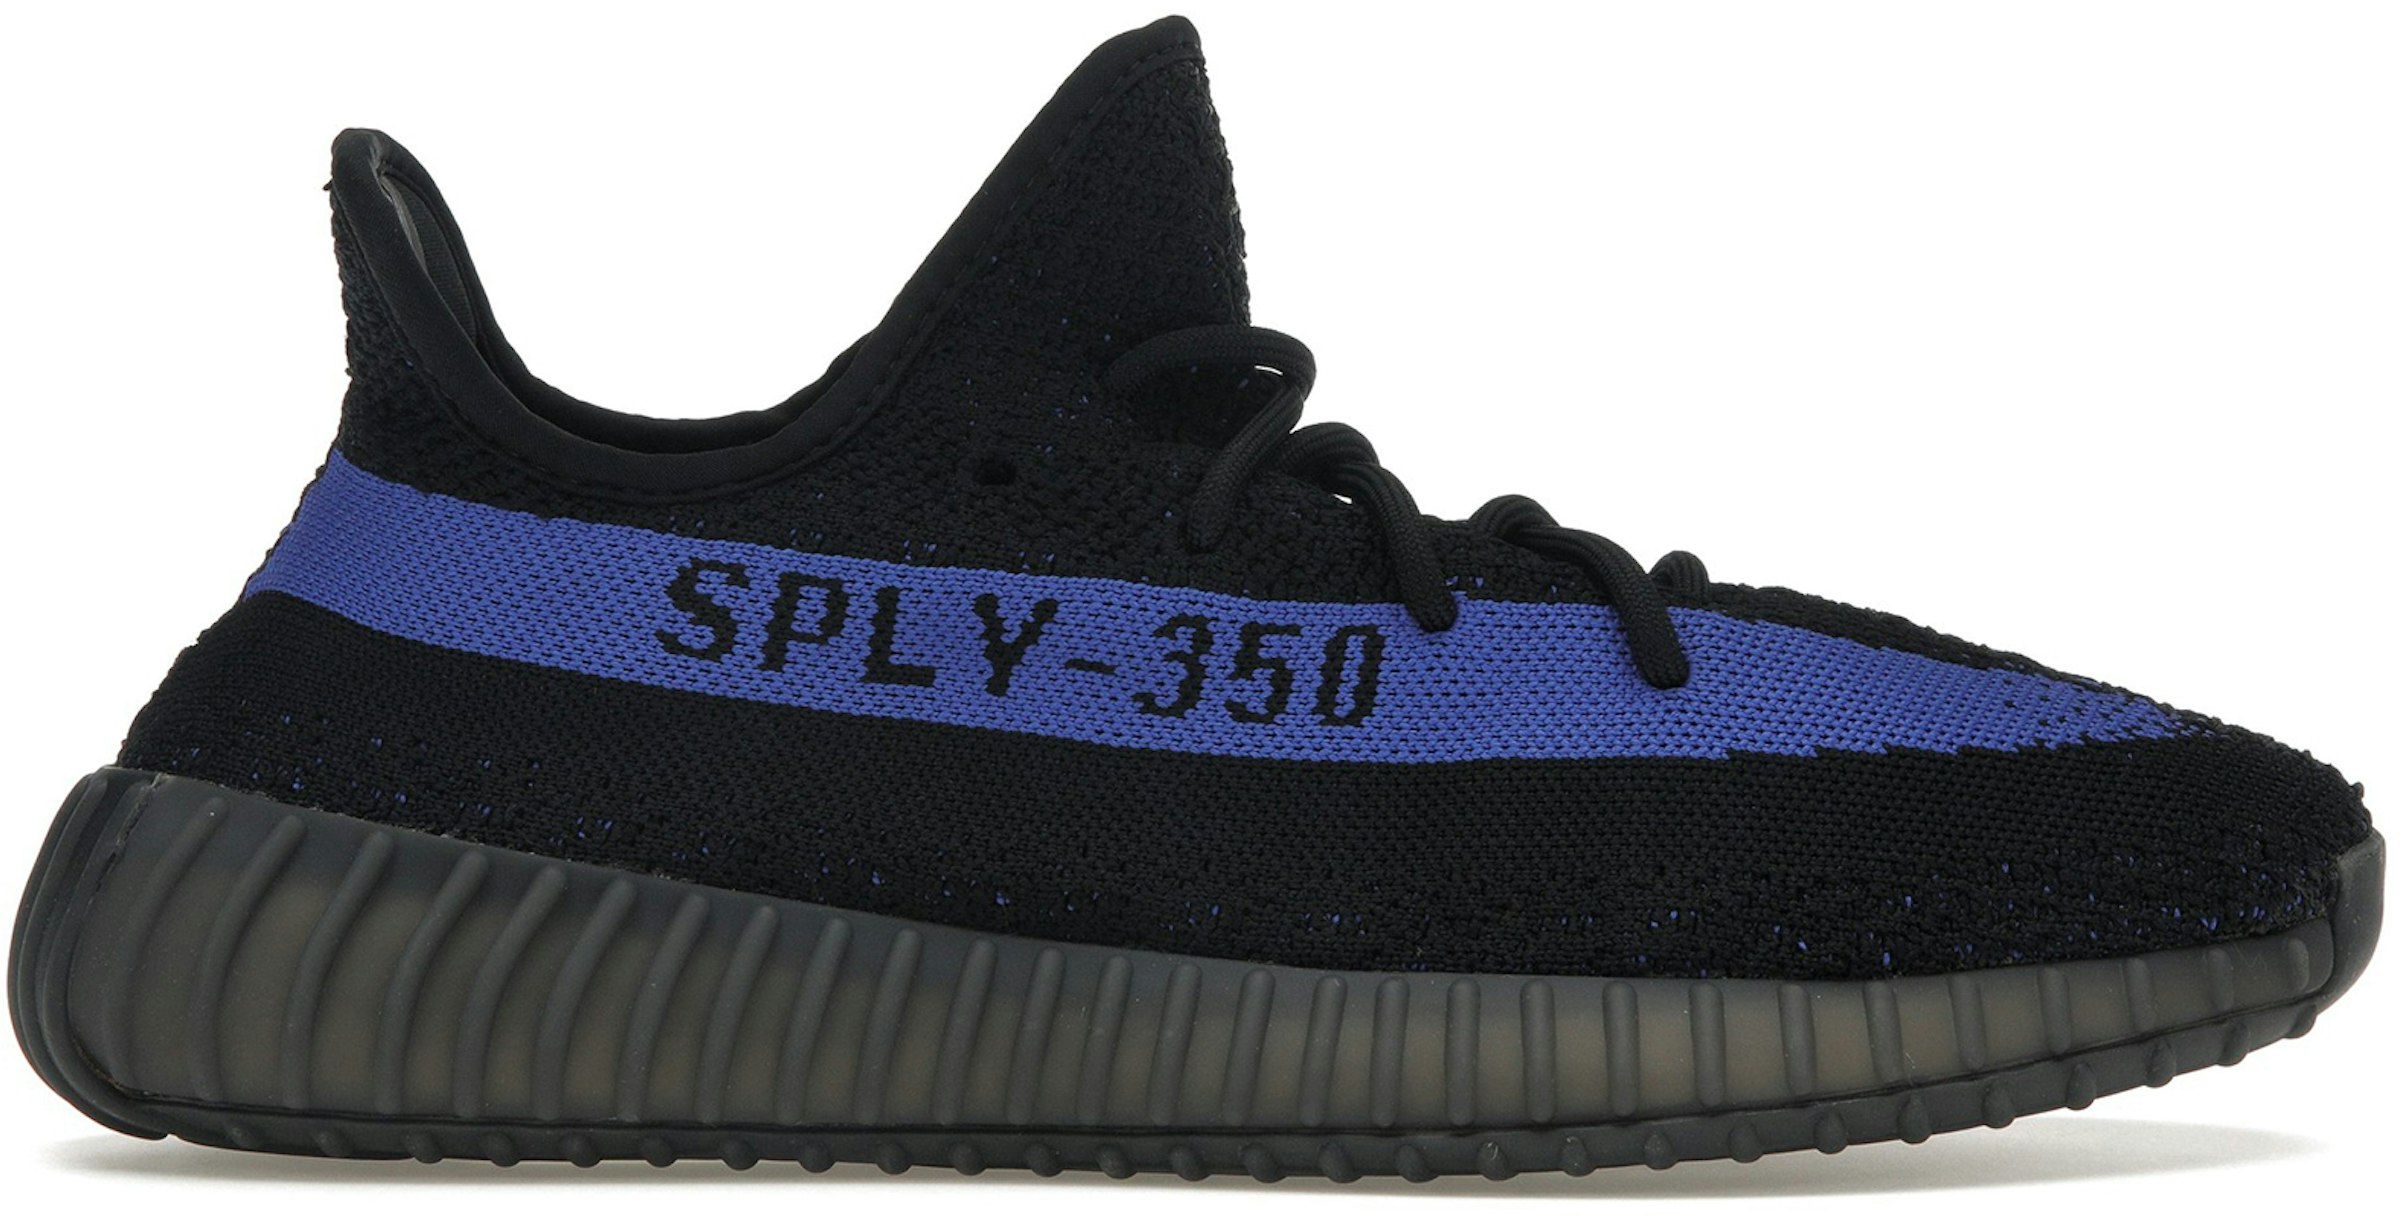 adidas Yeezy Boost 350 V2 Blue Men's - GY7164 - US